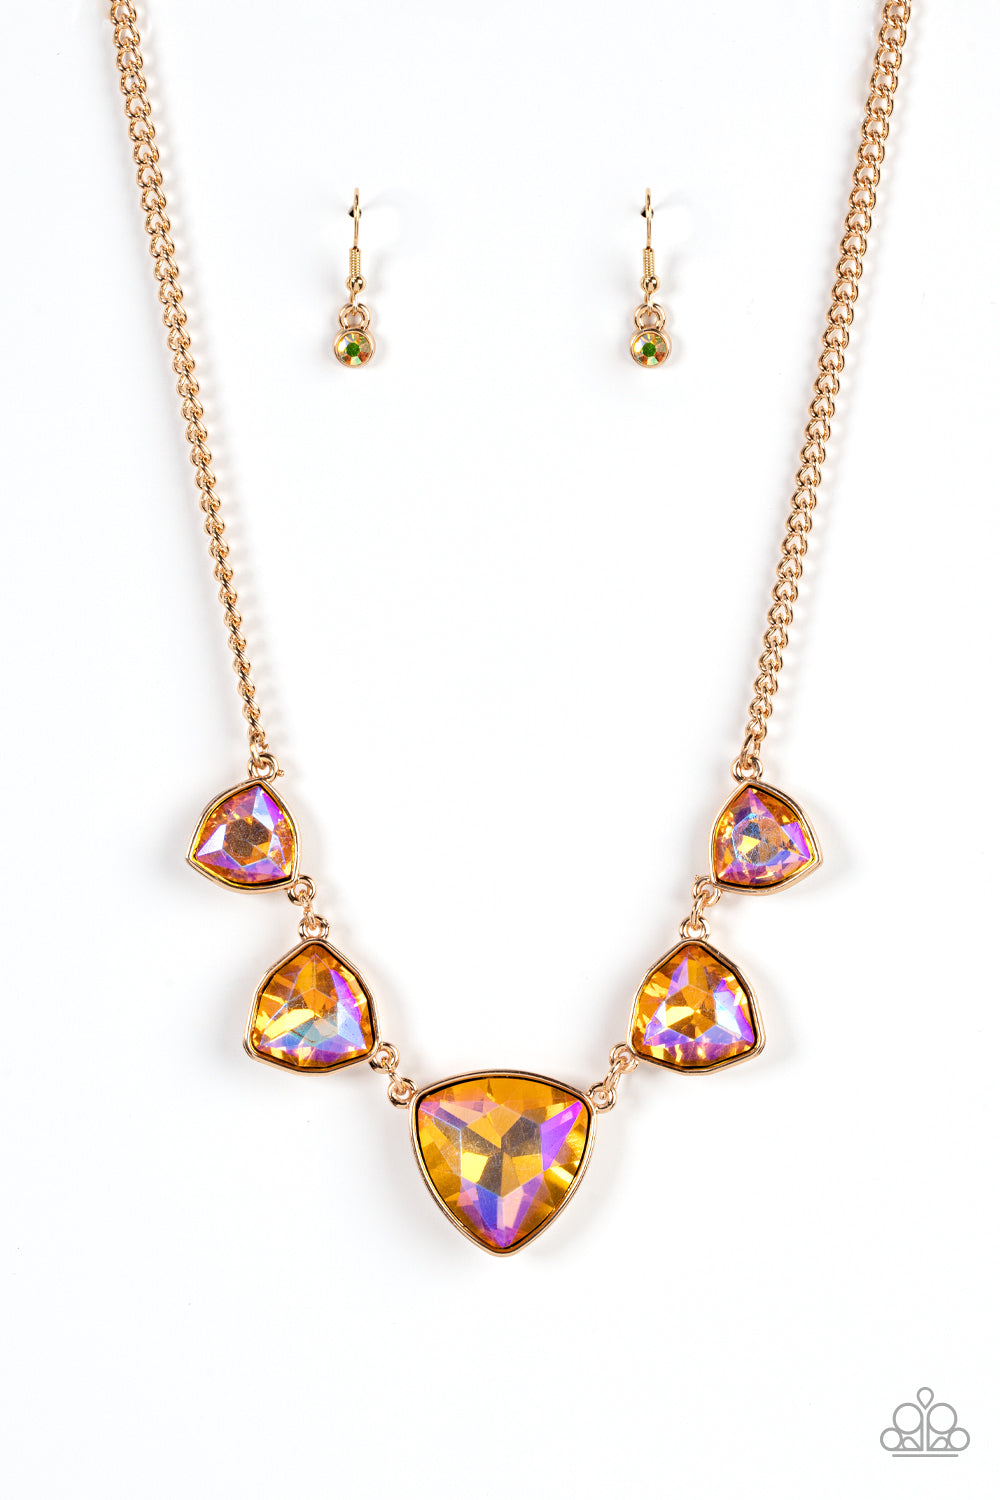 Encased in sleek gold fittings, an oversized collection of UV geometric gems gradually increase in size as they link below the collar for a golden statement. Features an adjustable clasp closure.  Sold as one individual necklace. Includes one pair of matching earrings.